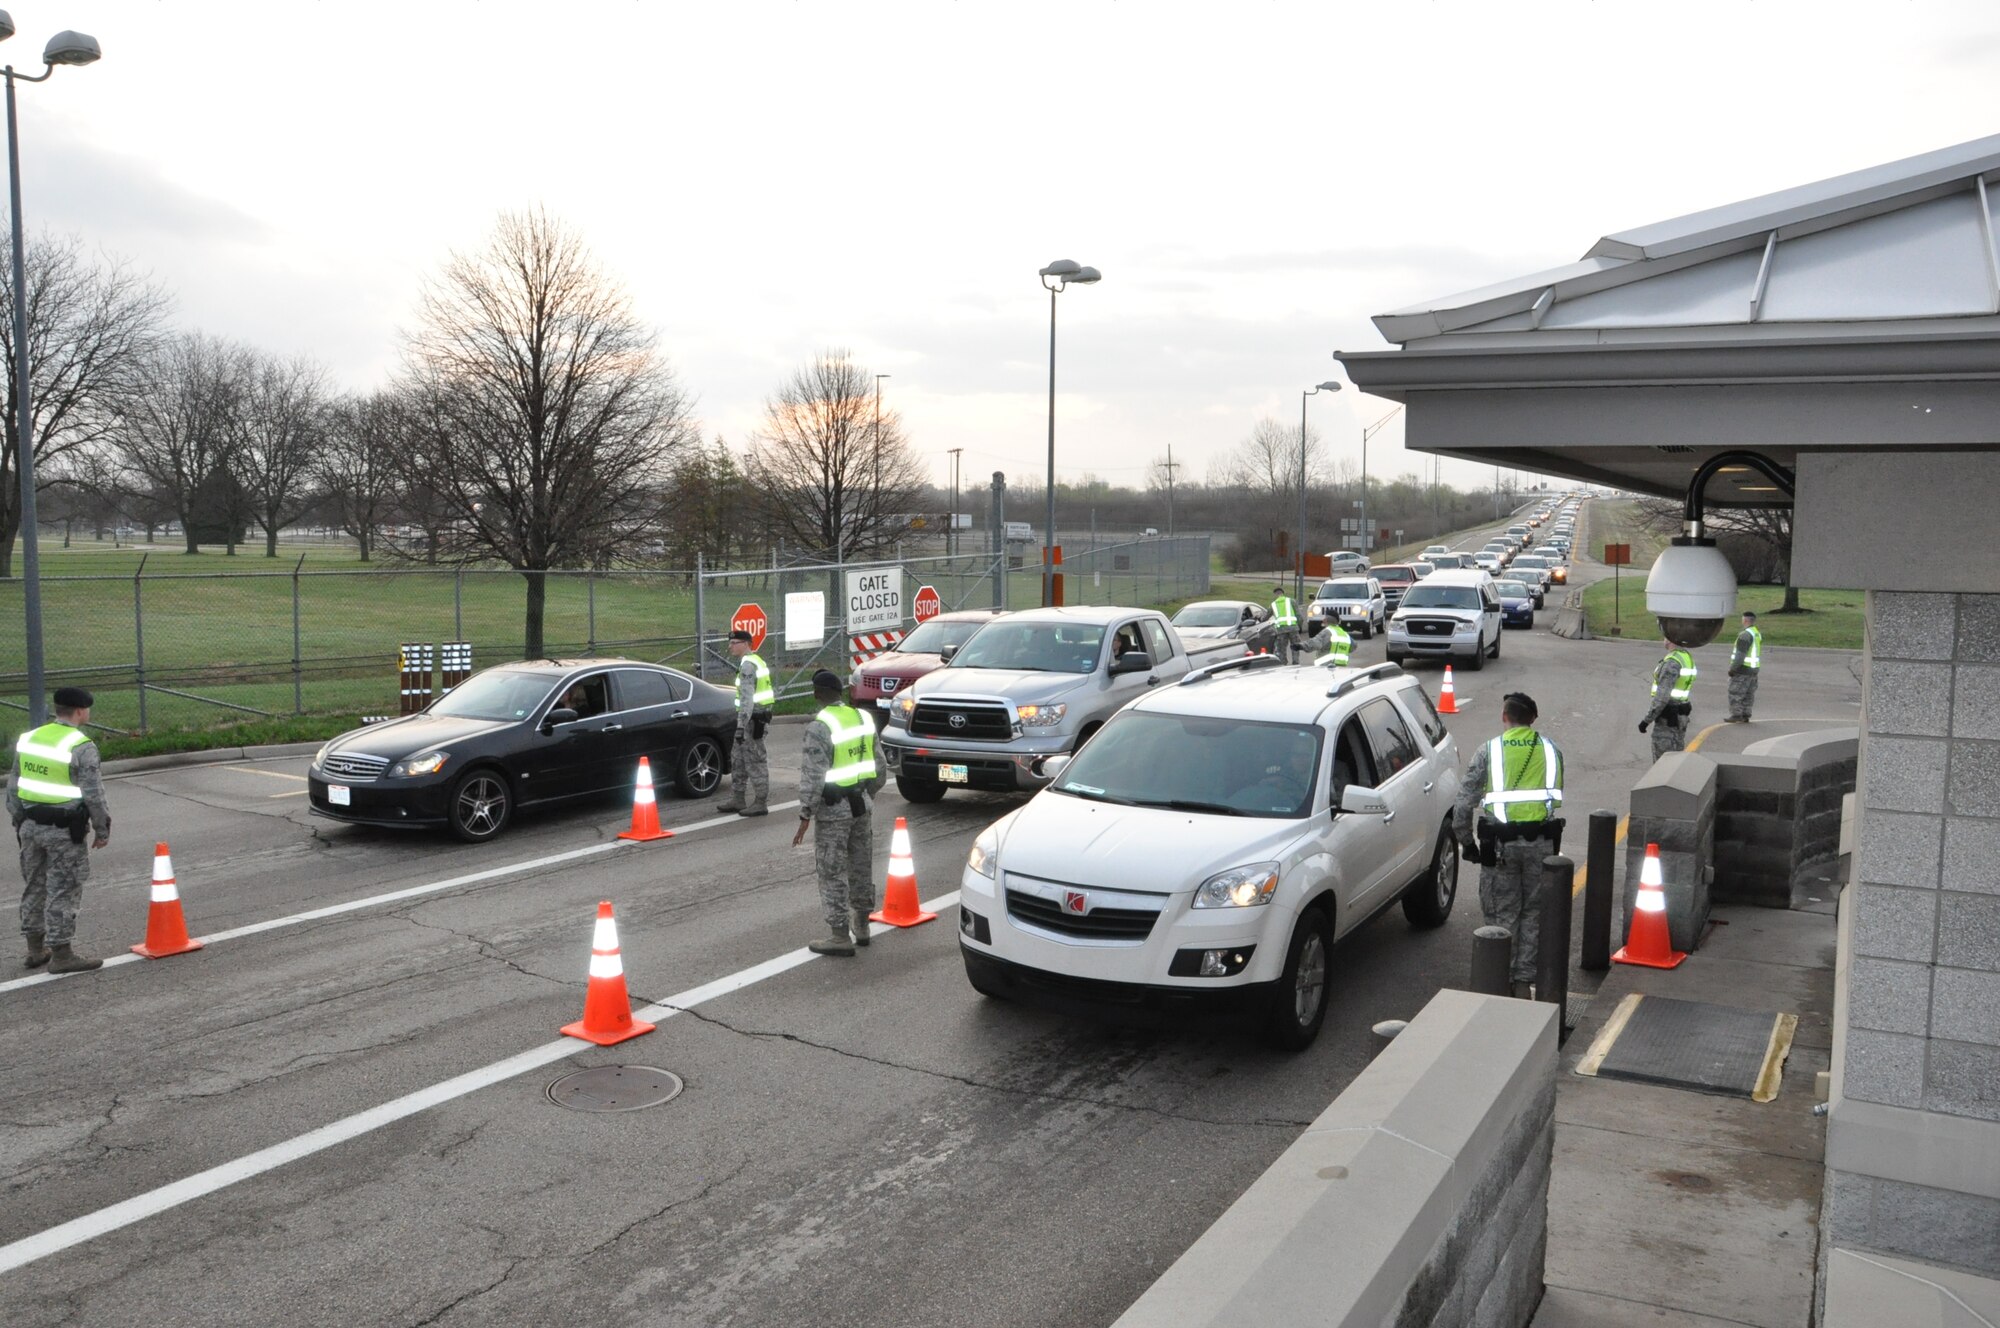 Traffic moves through Gate 15A at Wright-Patterson AFB on April 8, 2015.  The main headquarters gate is closed for repairs and upgrades, and Gate 15A is absorbing most of the extra traffic during the construction period.  US Air Force Photo by Jim Mitchell.